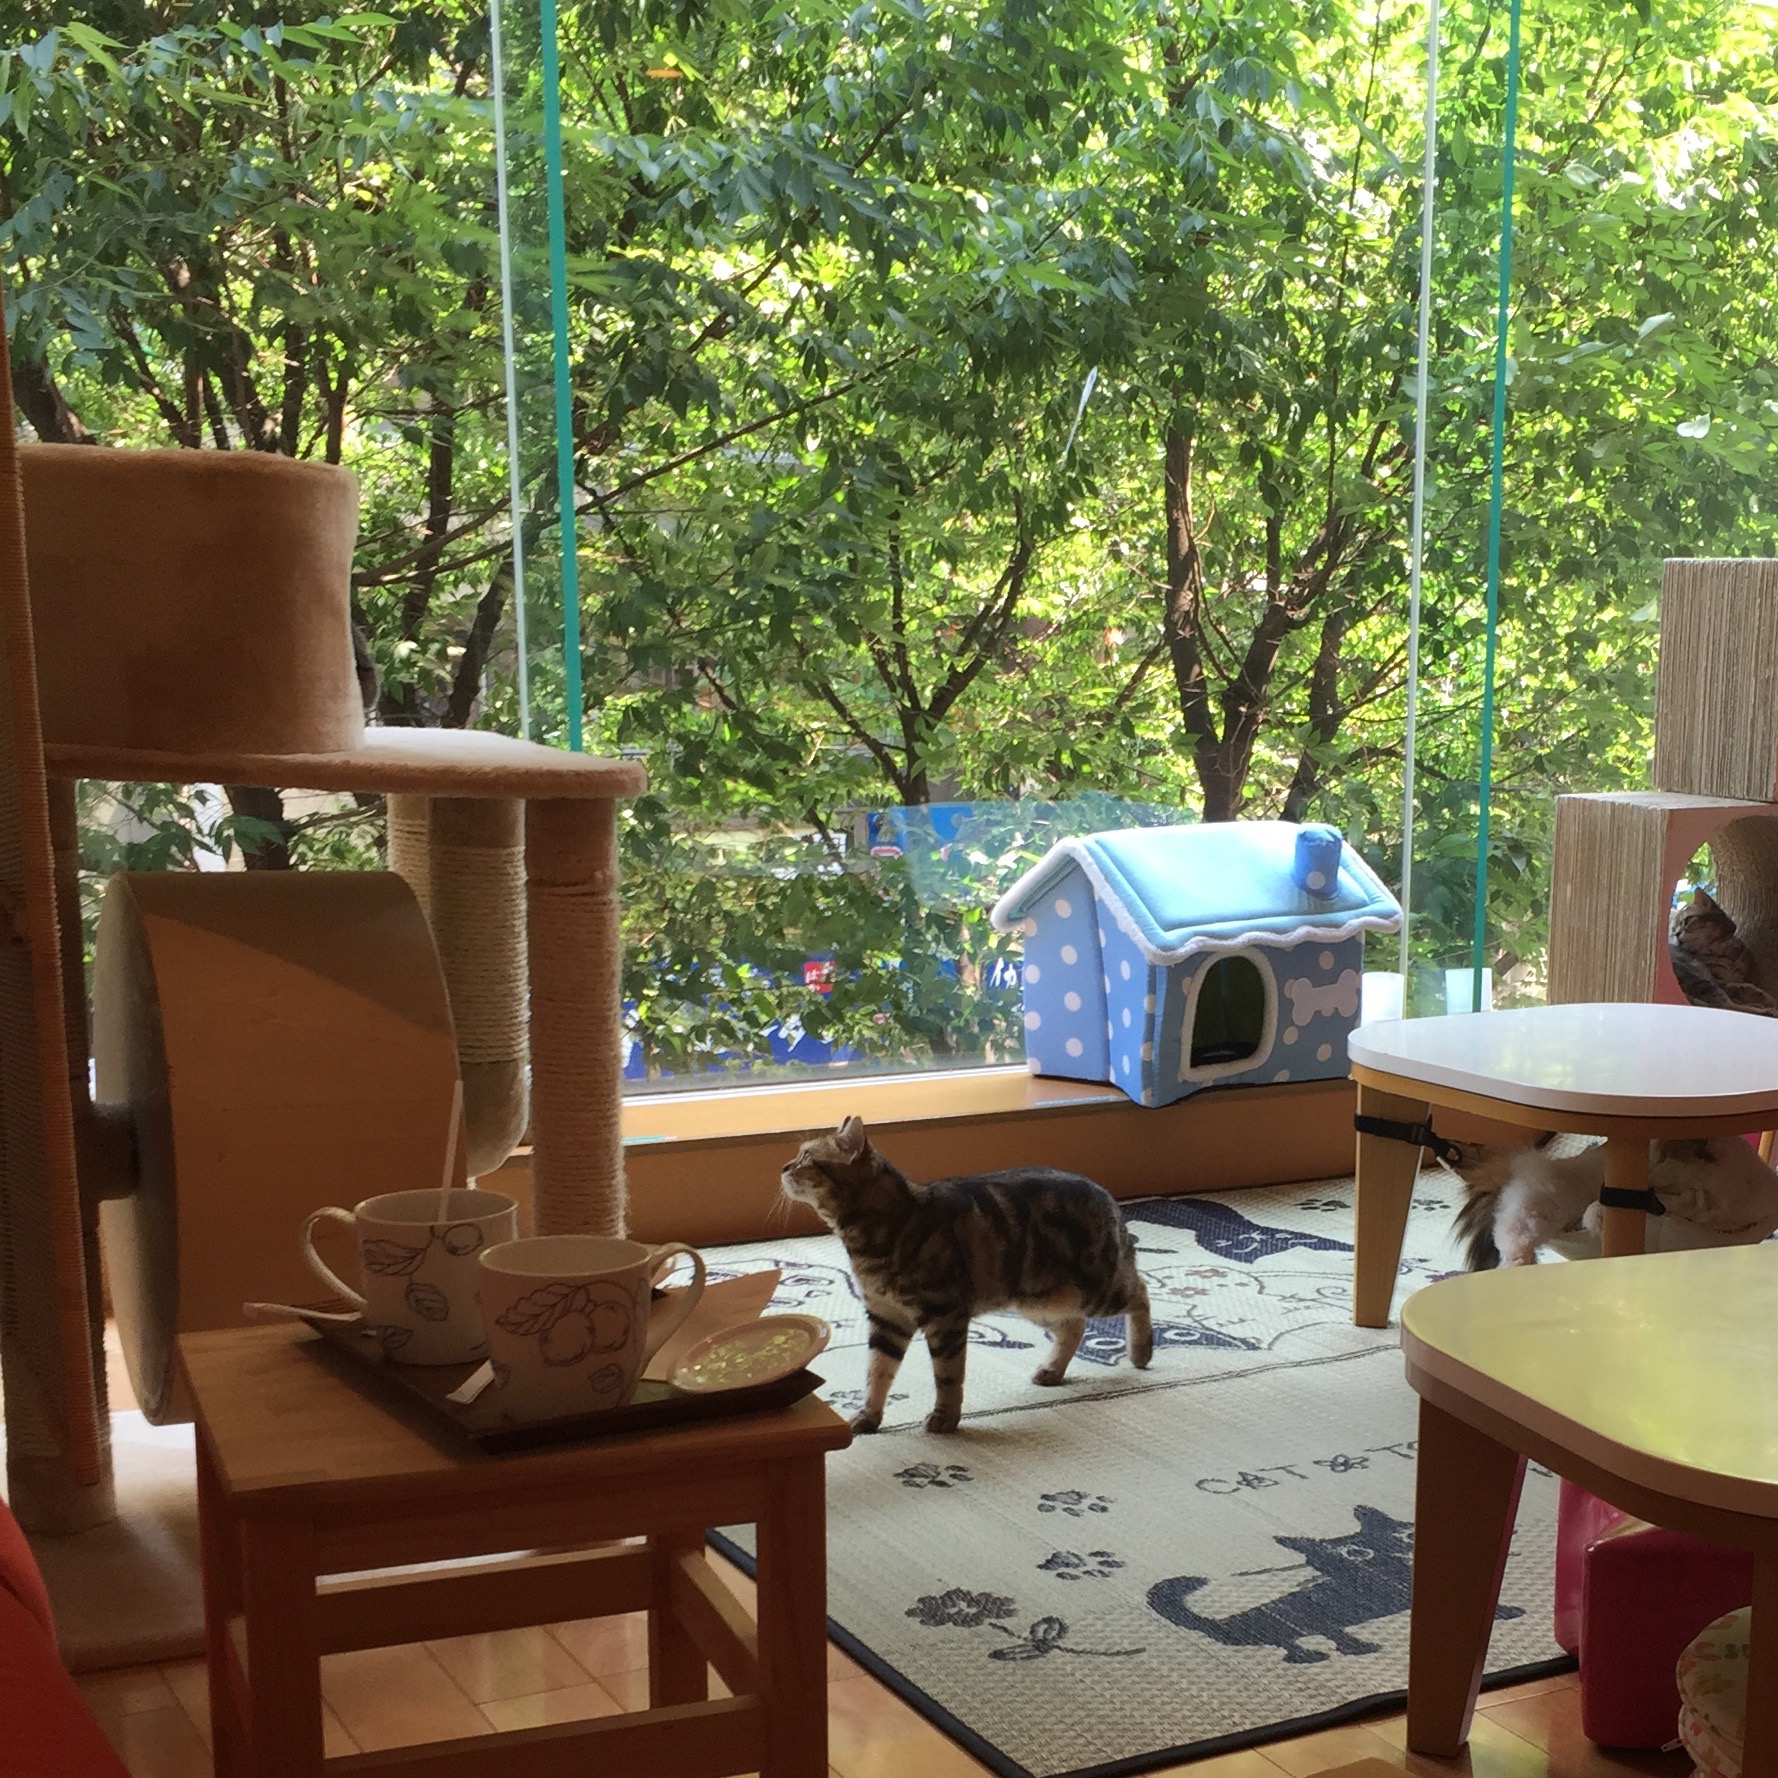 Have You Been to a Cat Cafe? - Travel Pockets